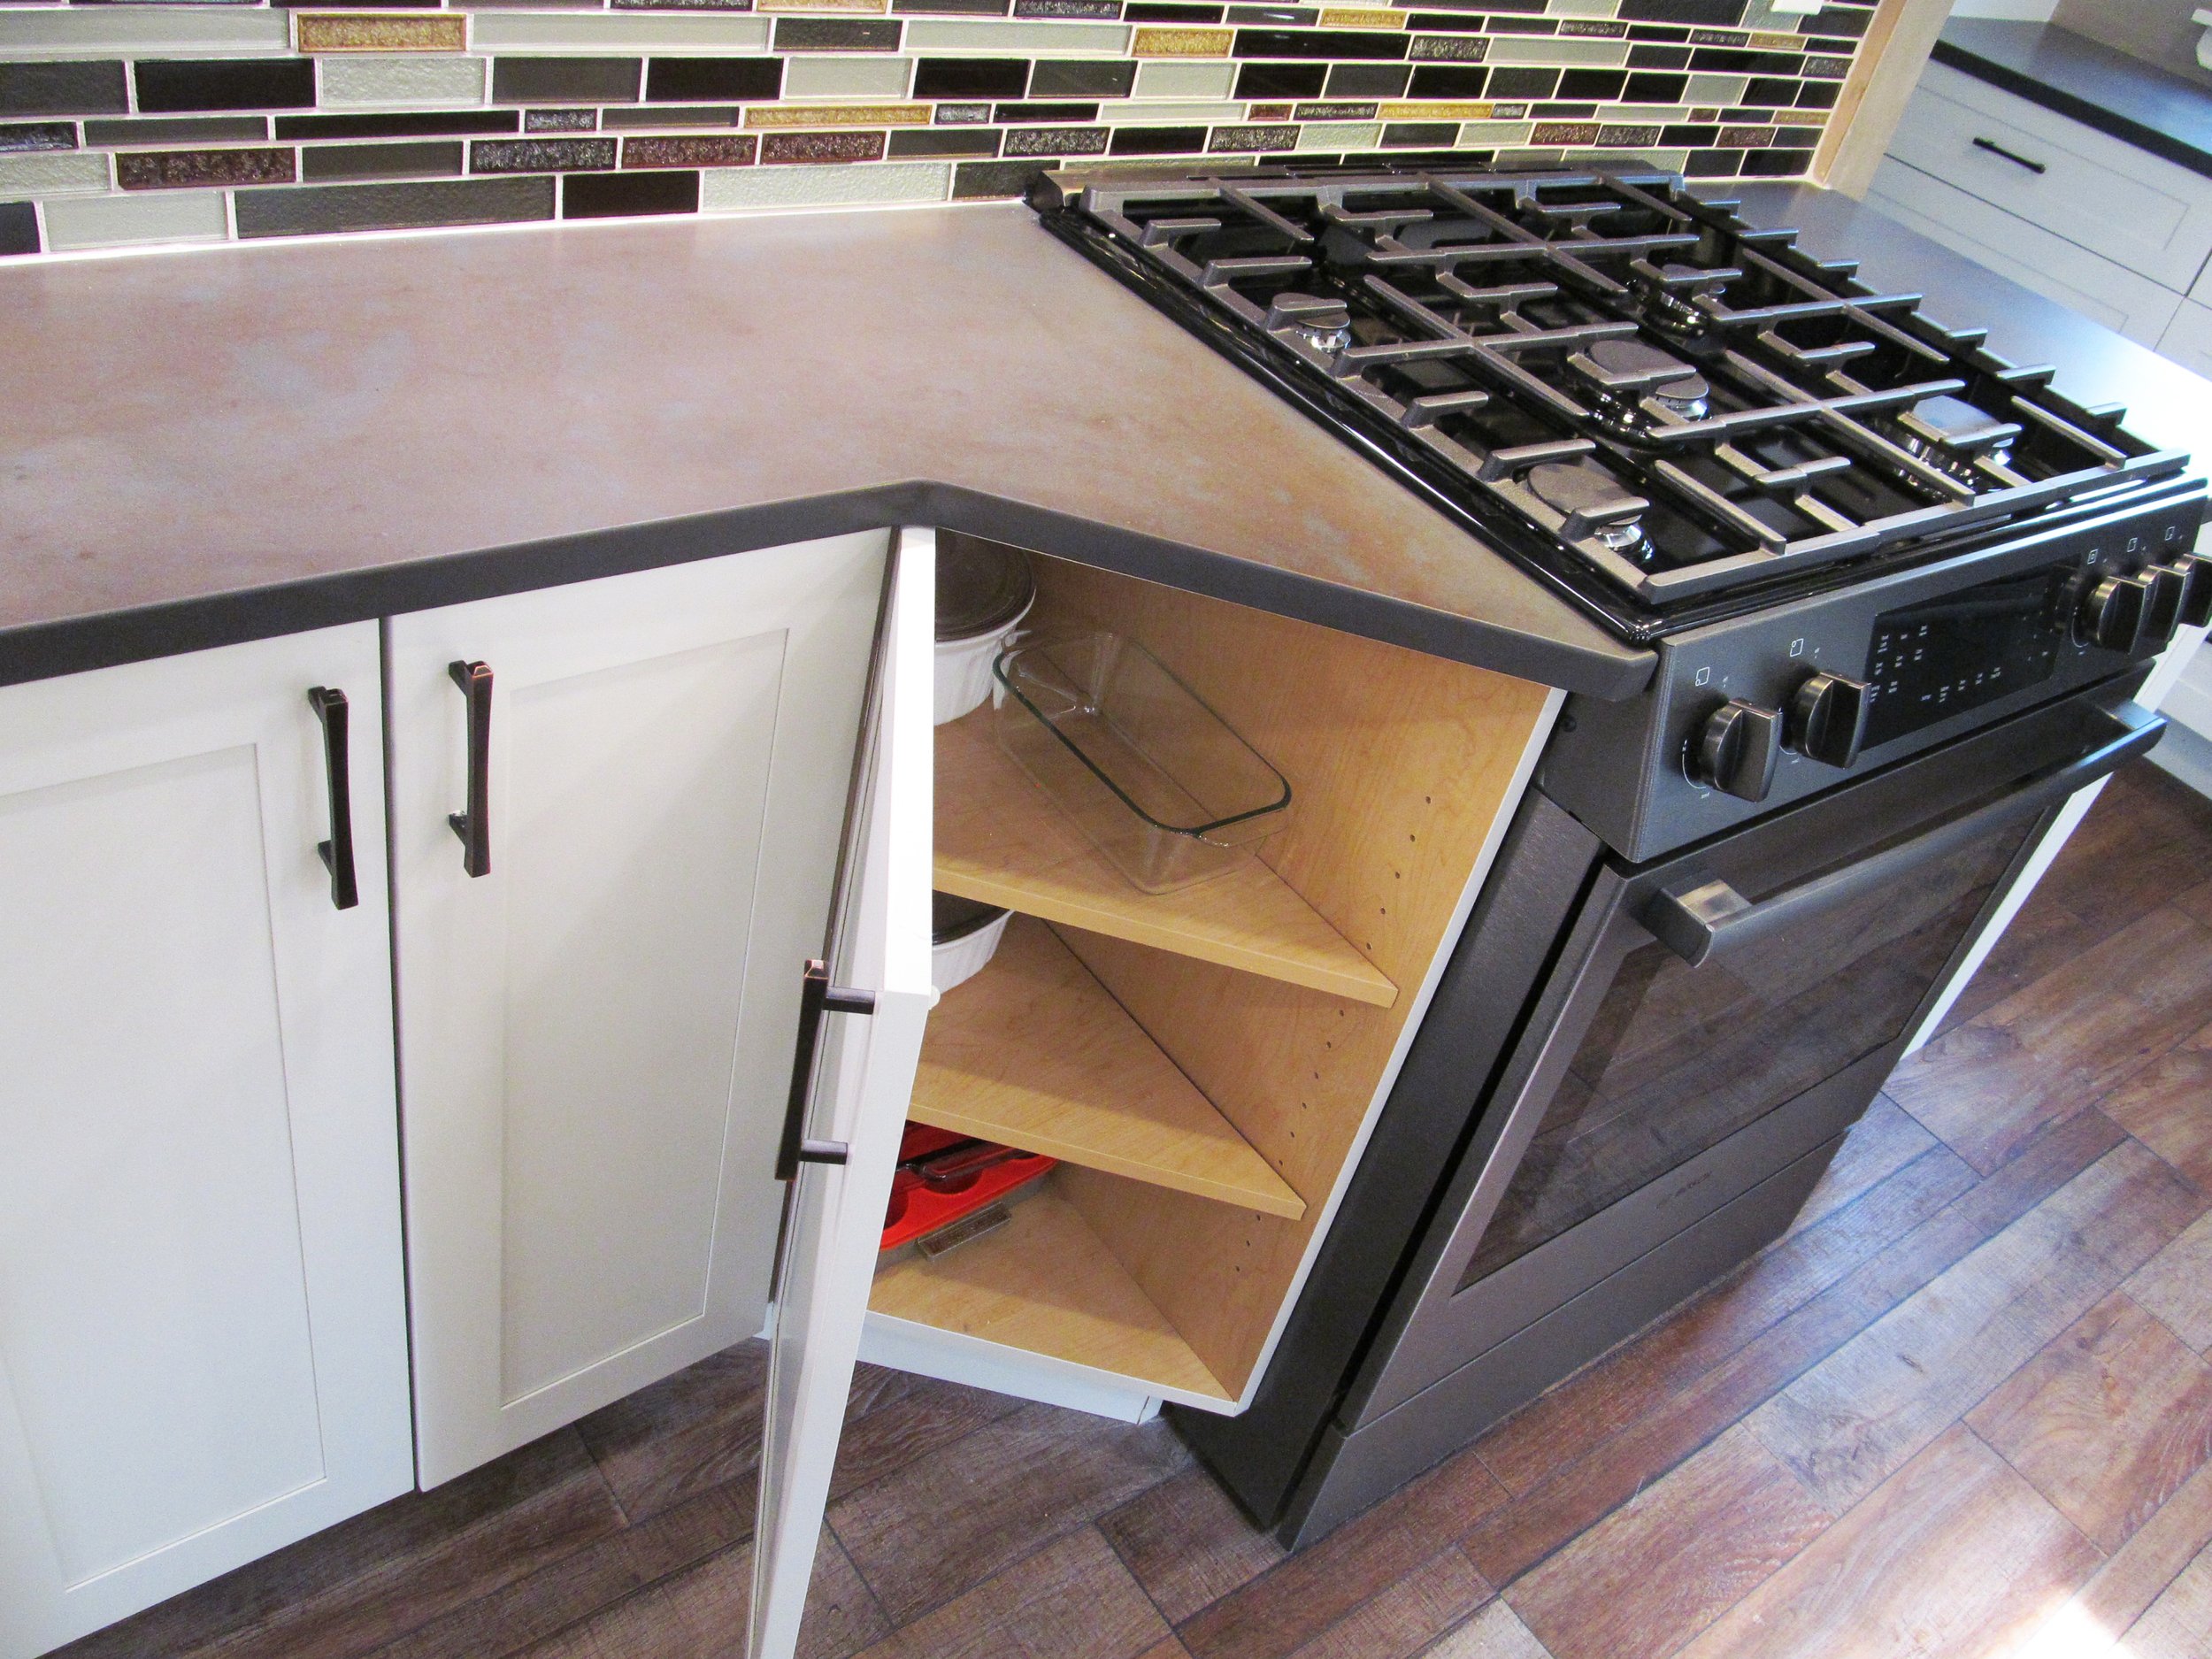 Angled cabinet makes the transition from shallow to range depth